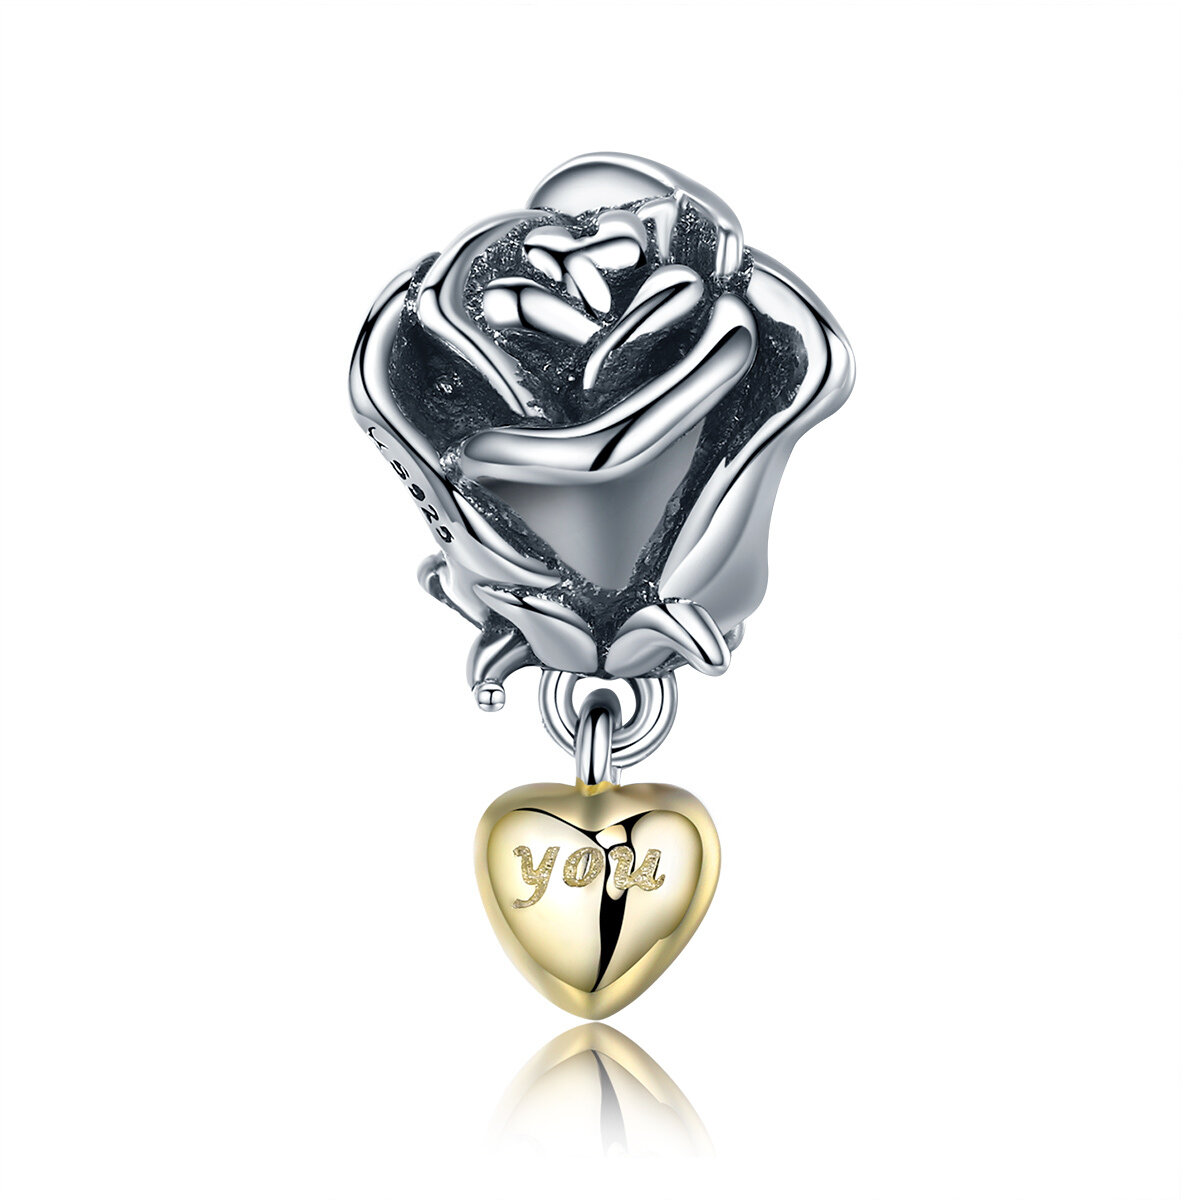 GemKing SCC455 the True Love Rose S925 Sterling Silver Charm